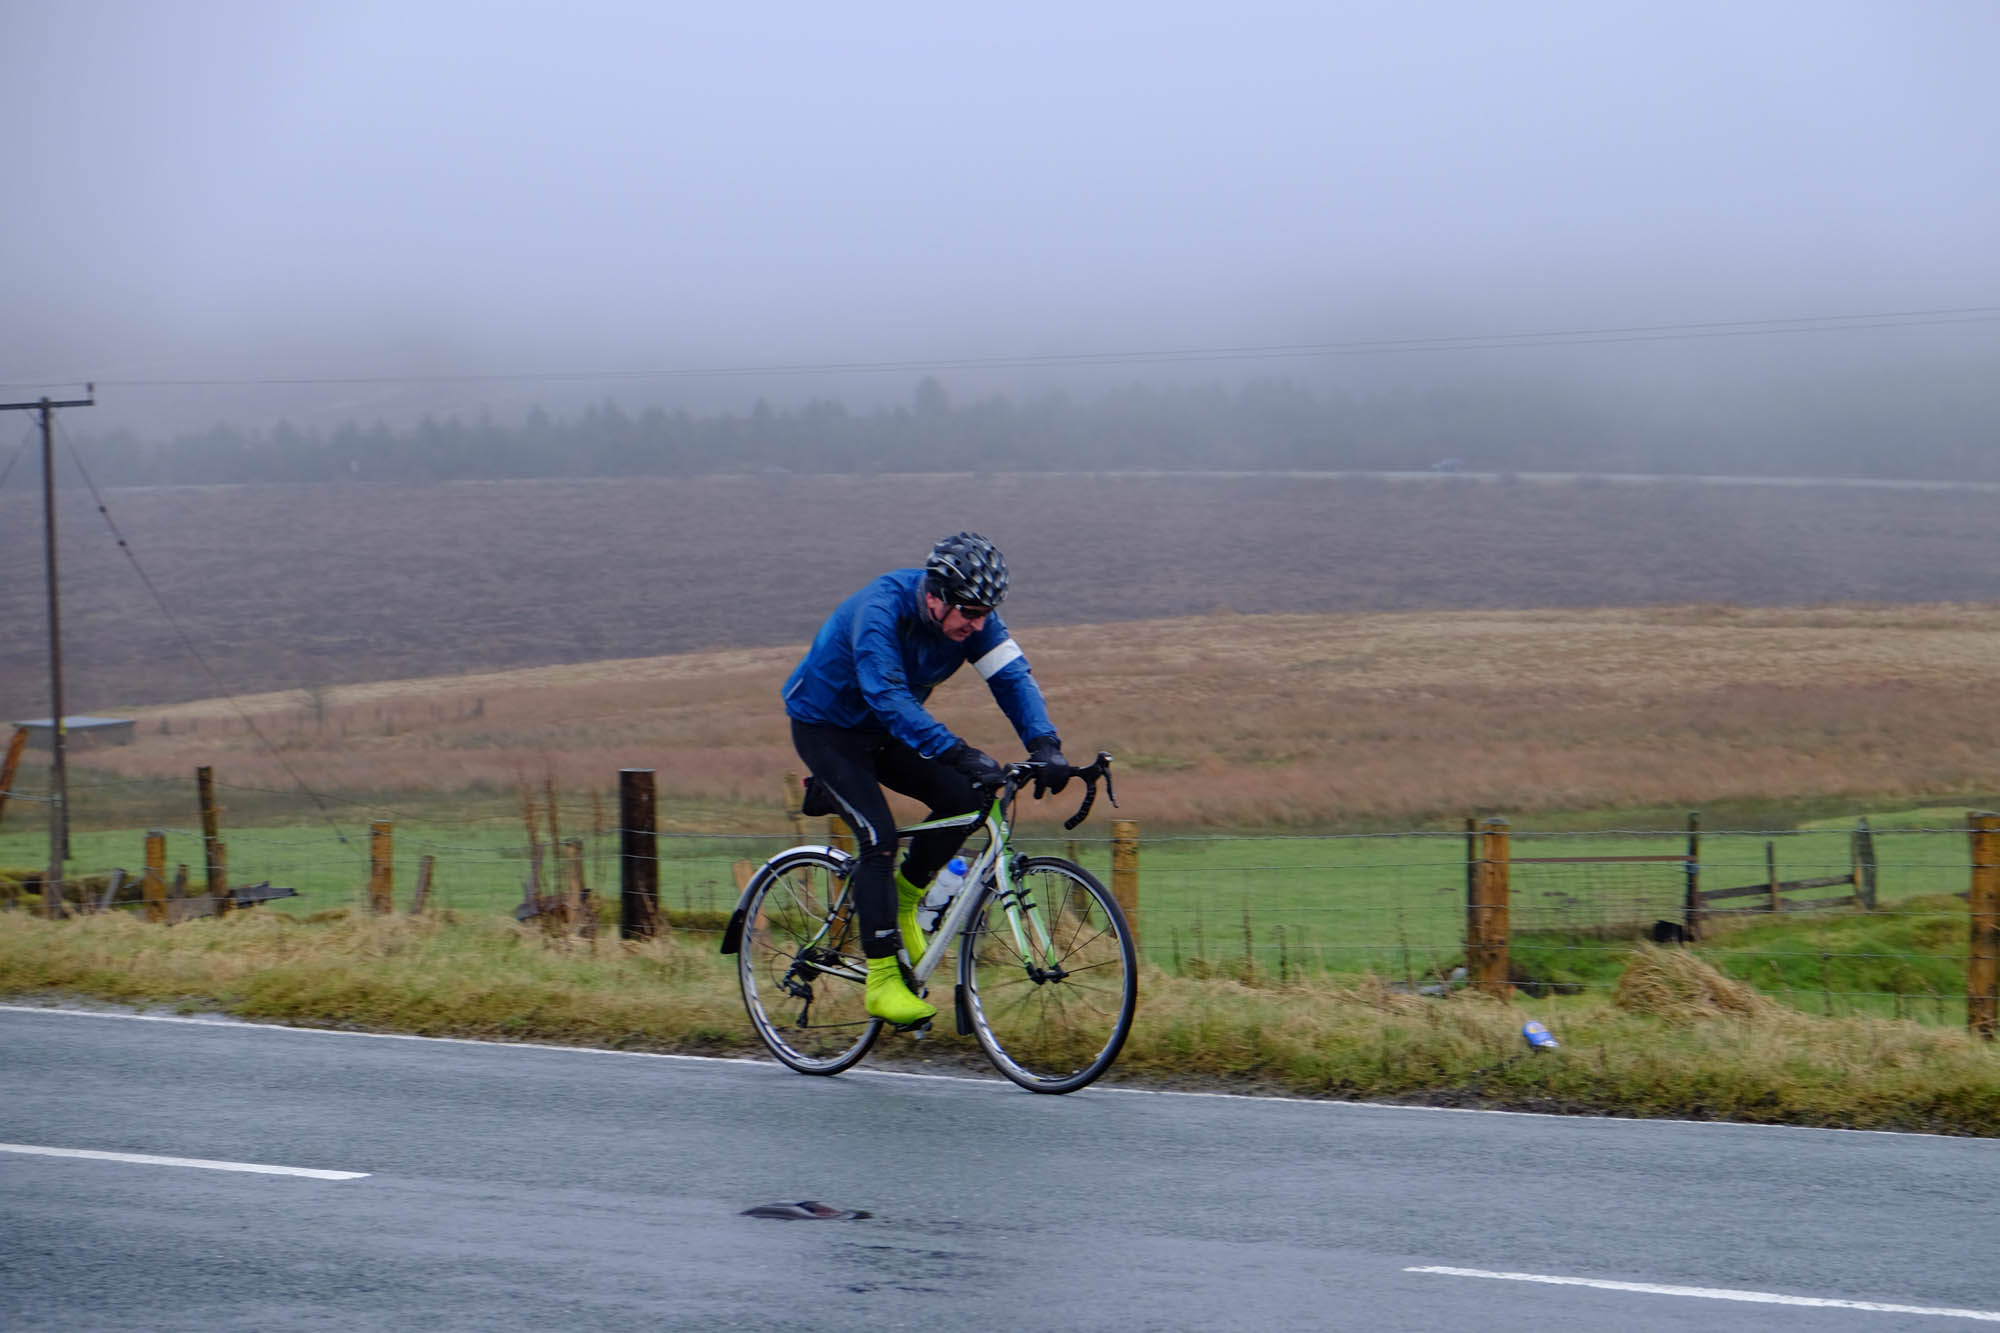 The mist, the murk, the rain, the win, the gritted teeth.